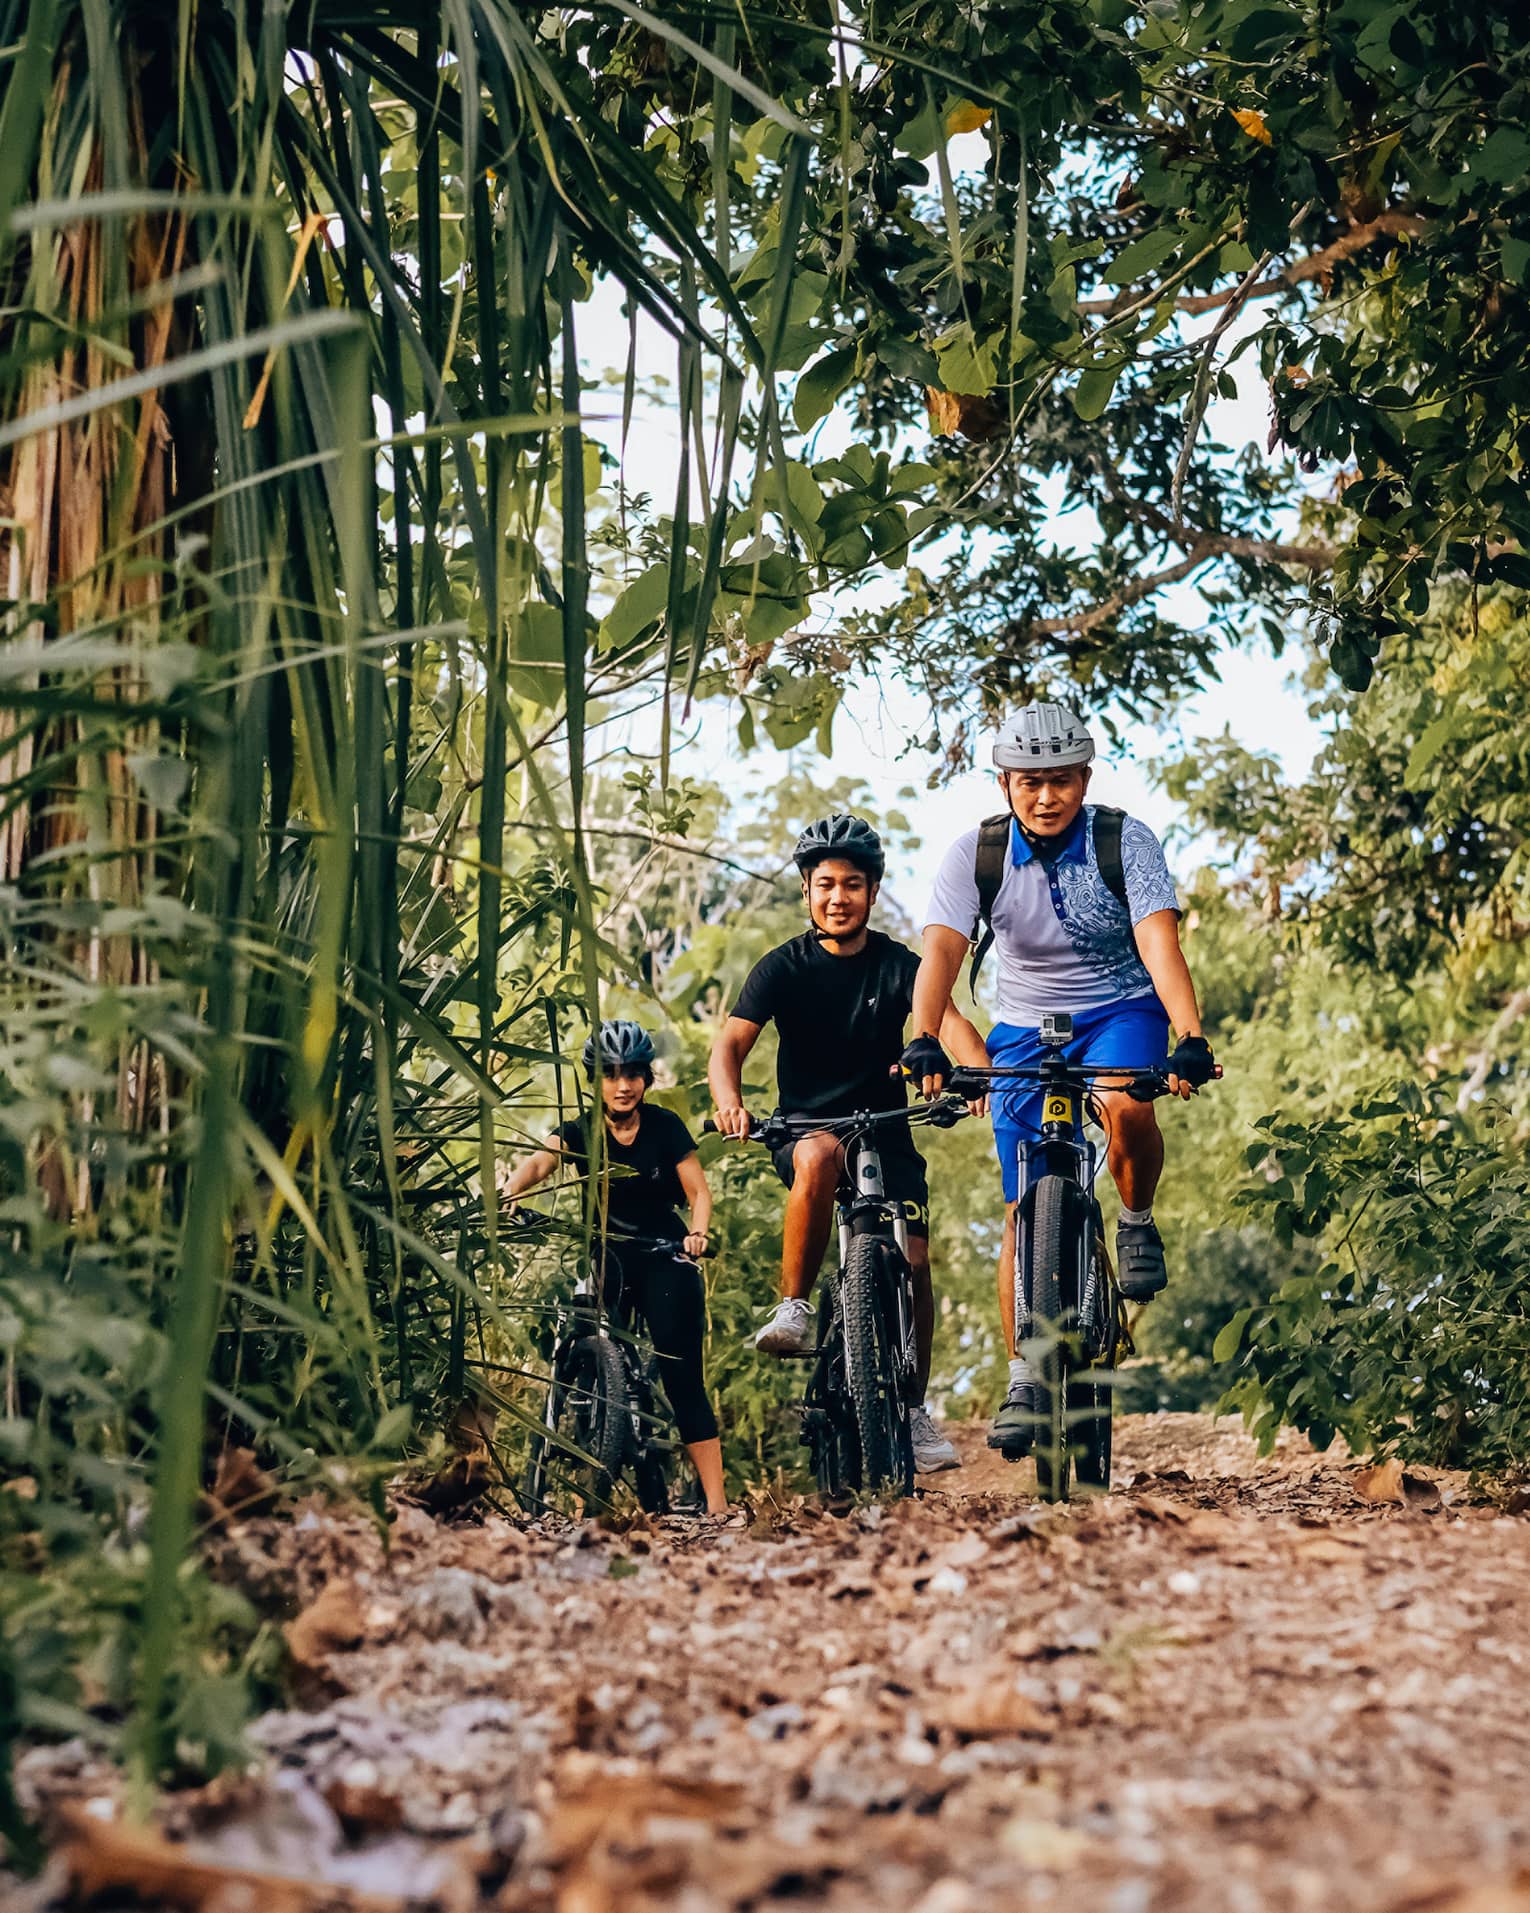 Three friends bike through the bamboo forest